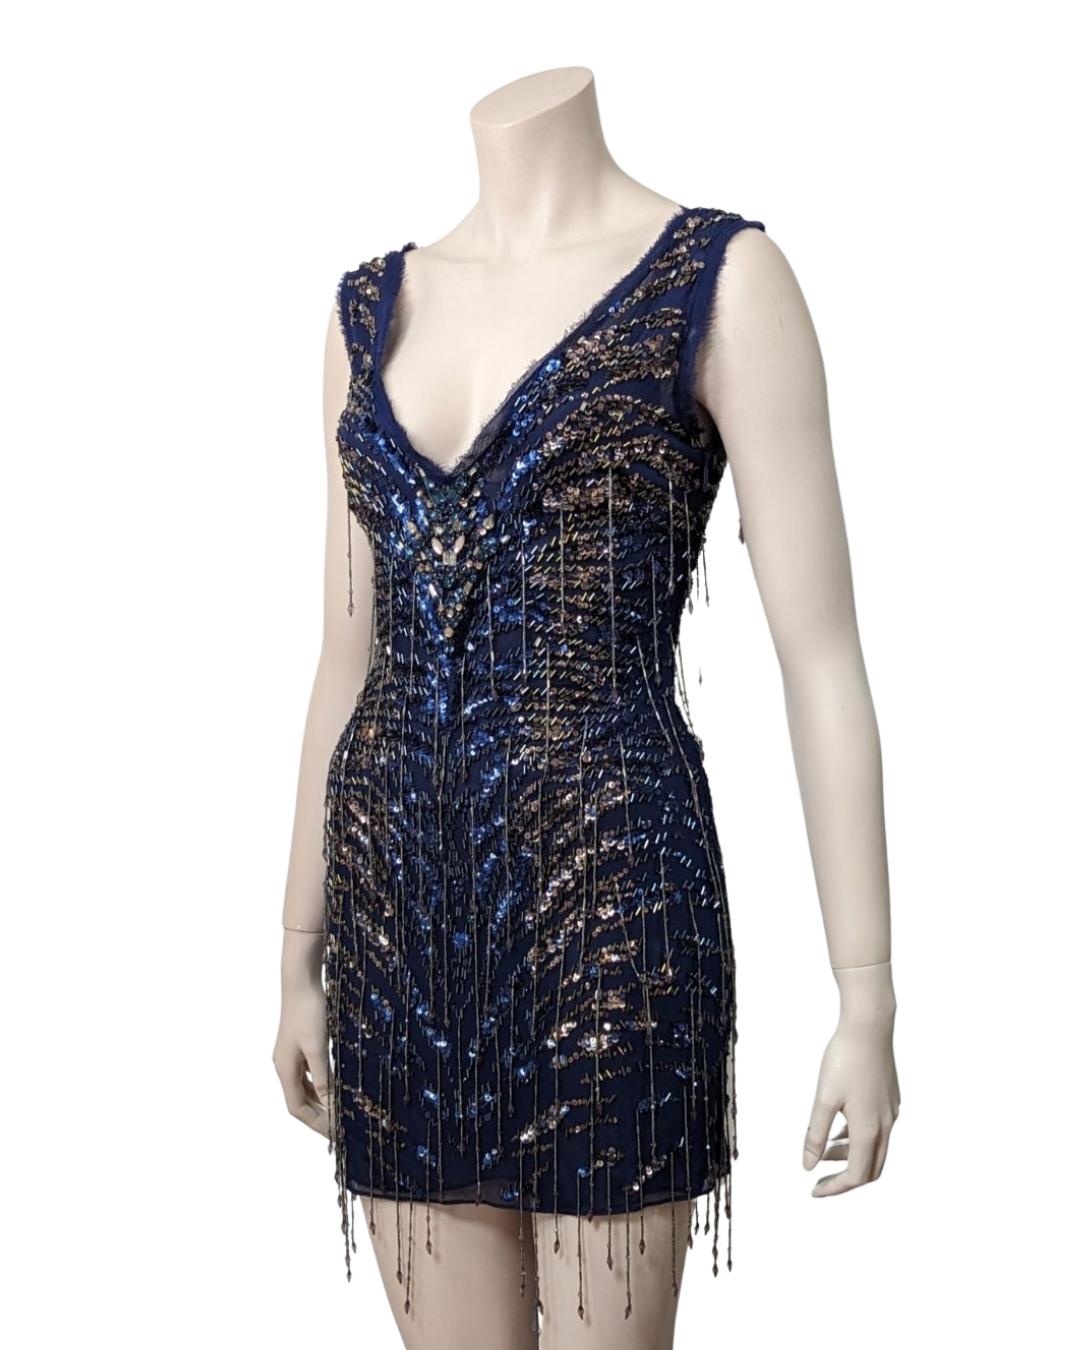 All over beaded silk mini dress. Circa 2000s. Impressive work o this dress. 

· Zip on the side
· V neckline back and bottom
. Two layers of silk fabric
 

Fits : S, M TAGS : 170 92a

Flat measurements : 

Breast : 45 cm
Waist : 39 cm
Hips : 43